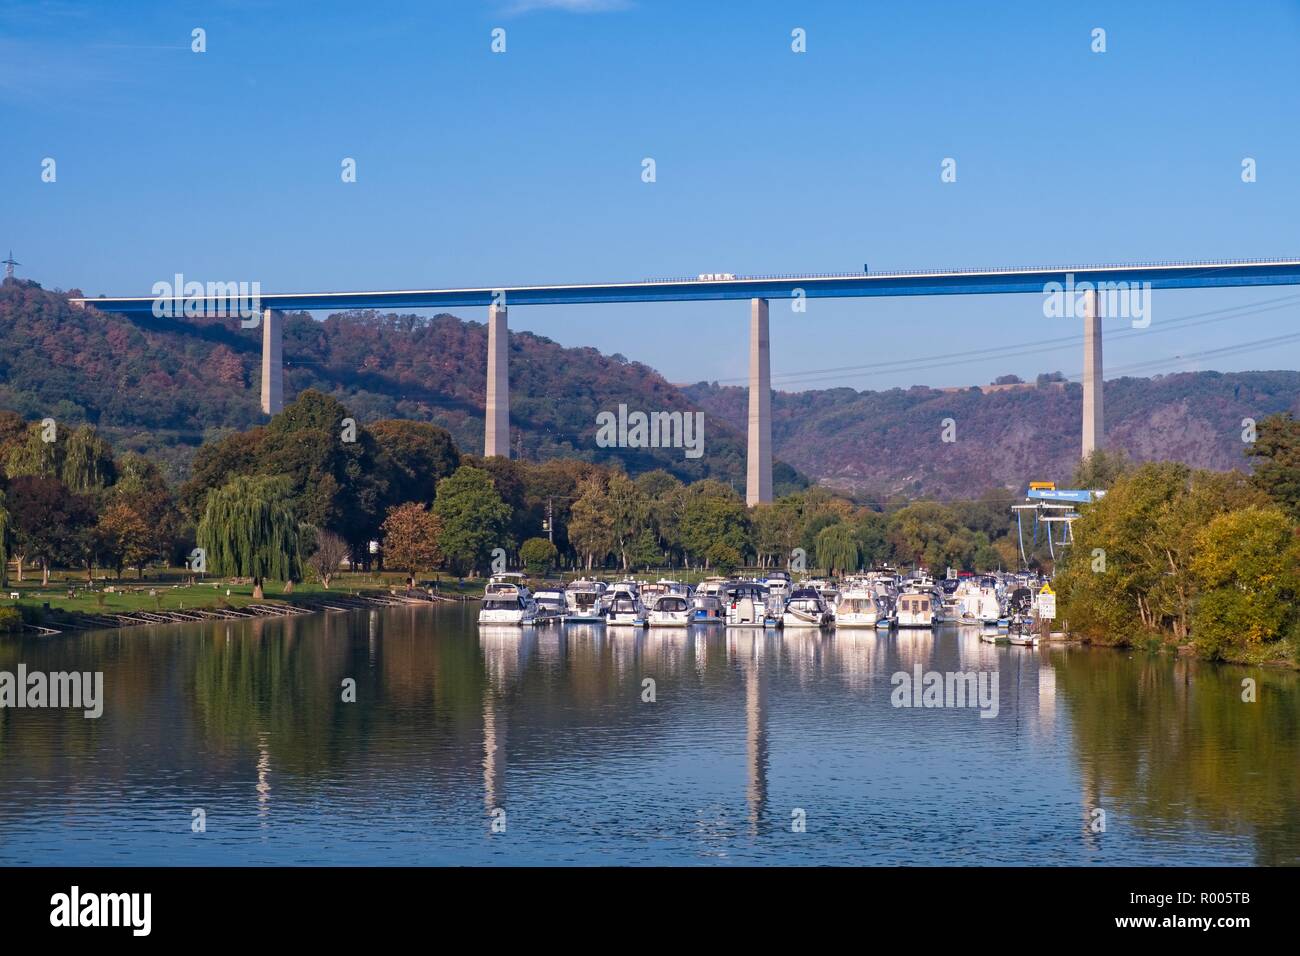 WINNINGEN A61 ROAD CROSSING OF THE RIVER MOSEL VALLEY GERMANY WITH MARINA BELOW Stock Photo